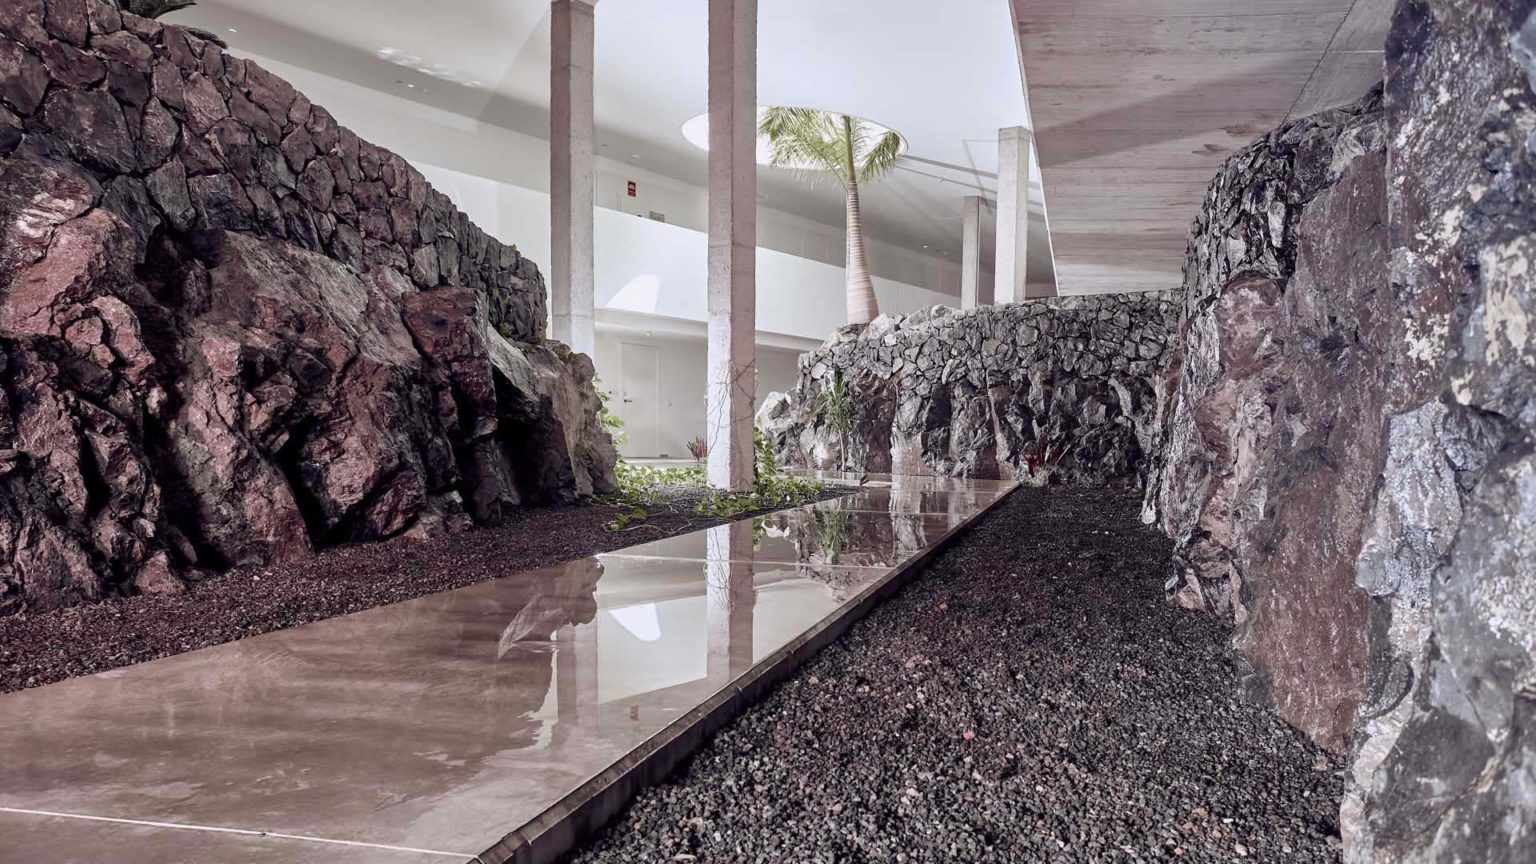 Baobab Suites open air lobby walking path surrounded by natural stone walls